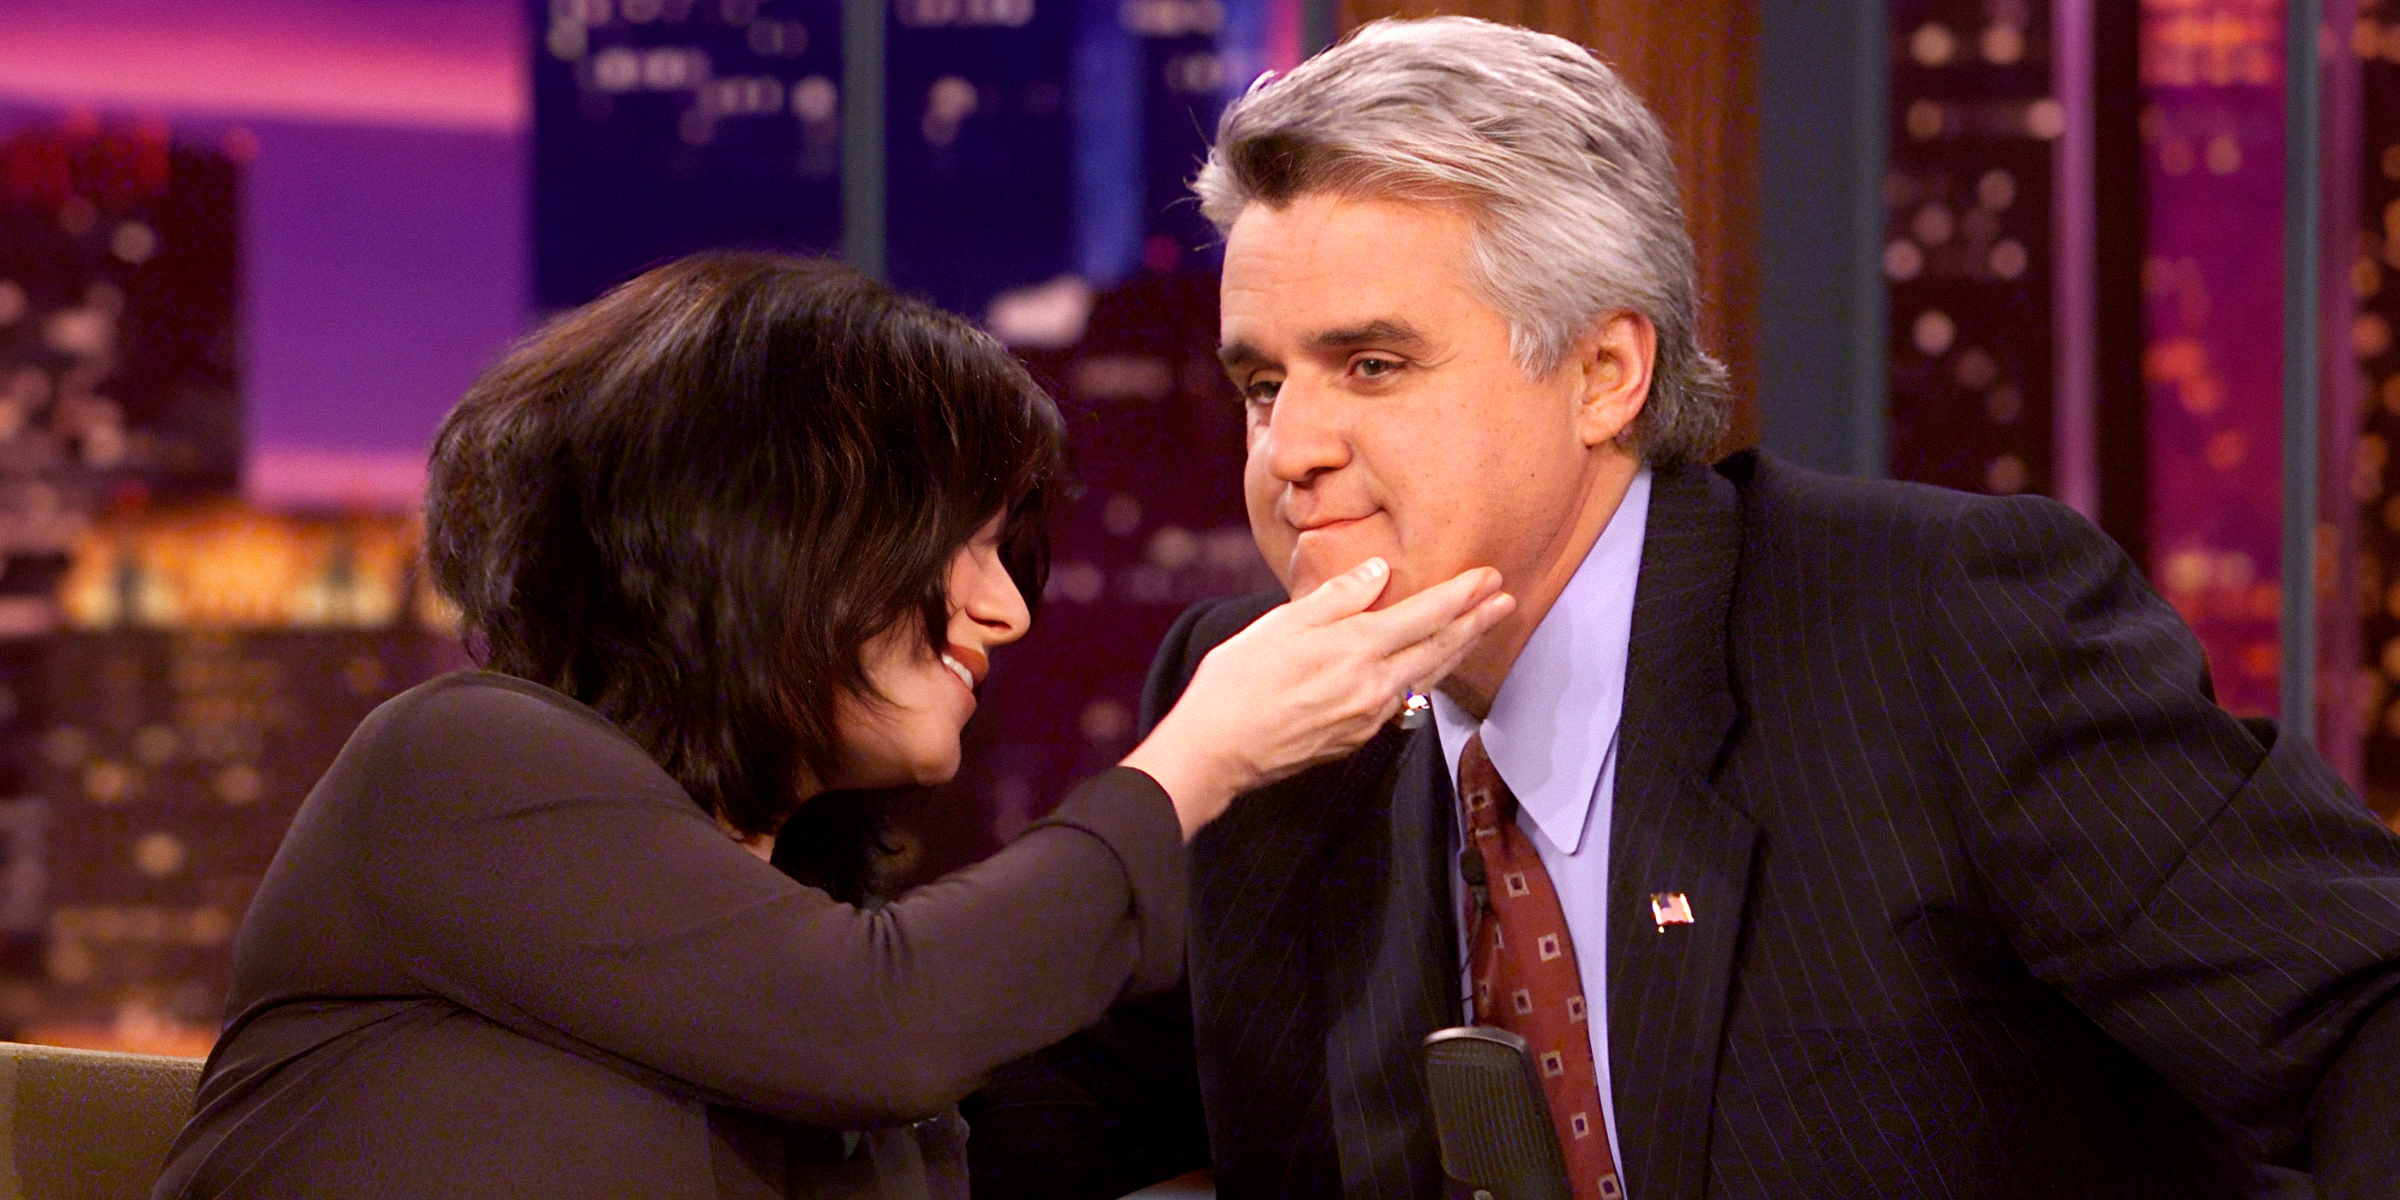 Mavis and Jay Leno | Source: Getty Images